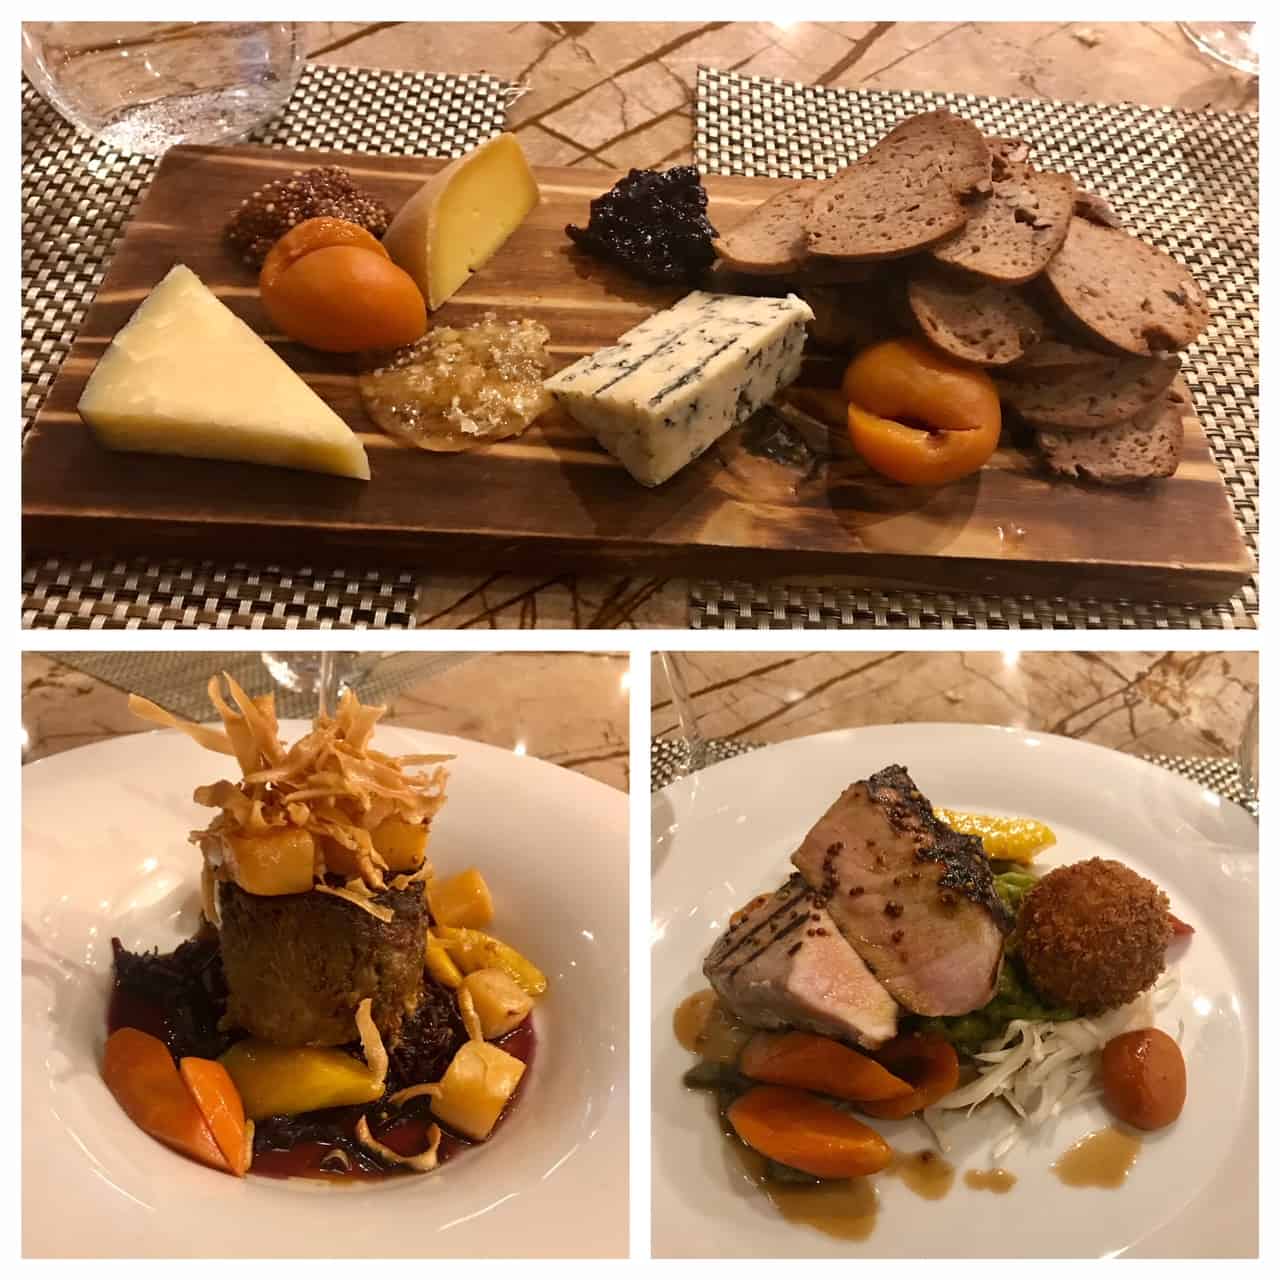 Collage of images of dishes from Treadwell Restaurant